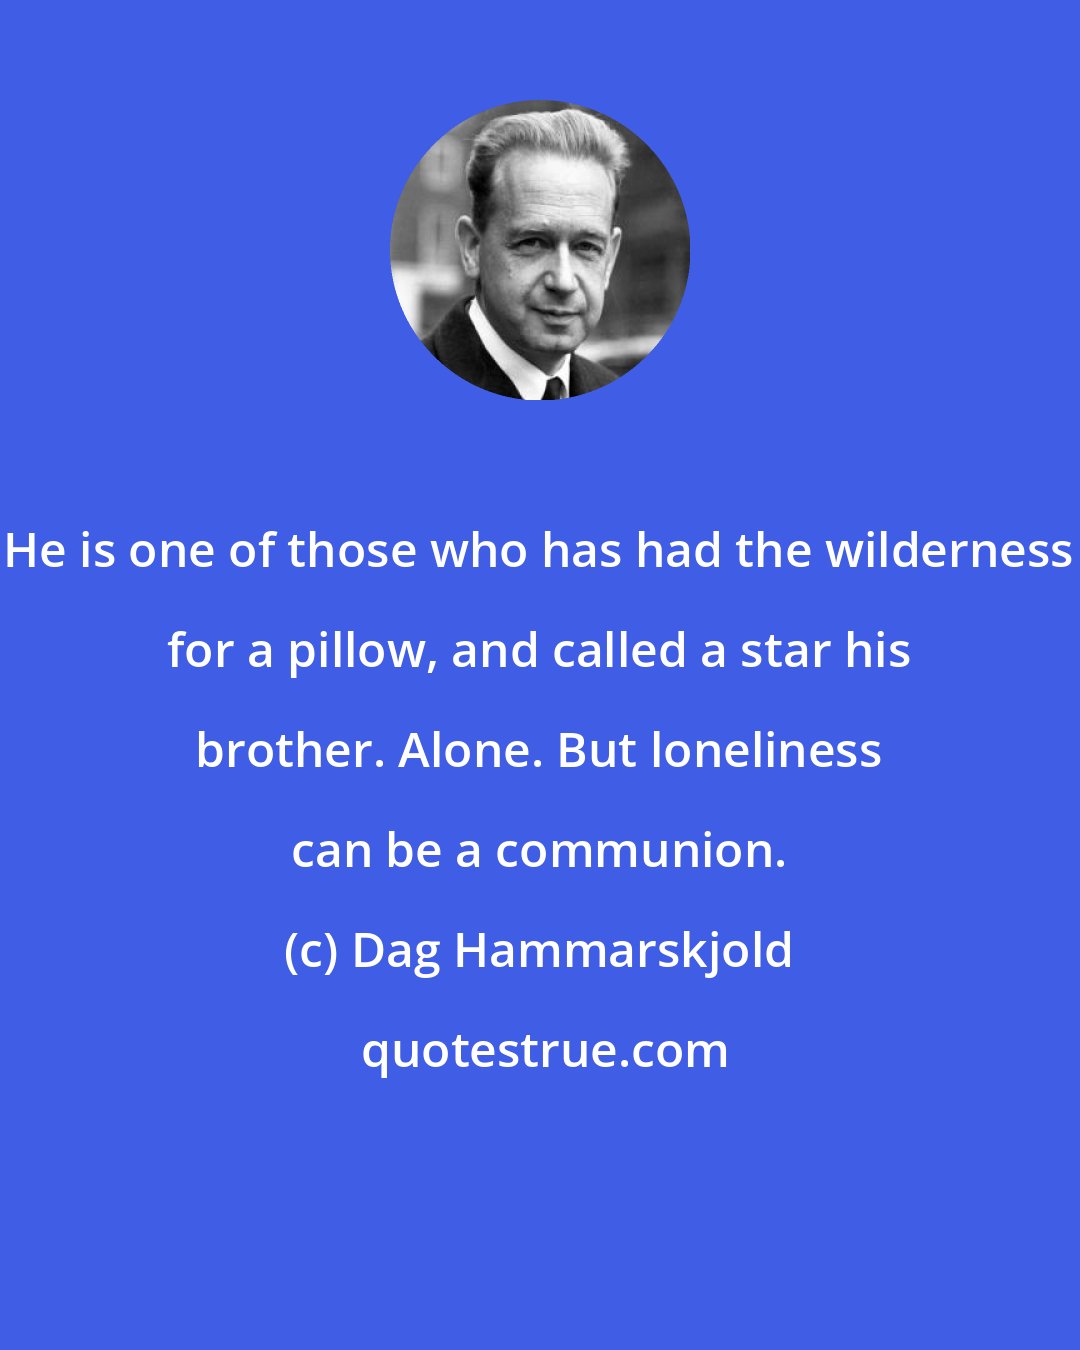 Dag Hammarskjold: He is one of those who has had the wilderness for a pillow, and called a star his brother. Alone. But loneliness can be a communion.